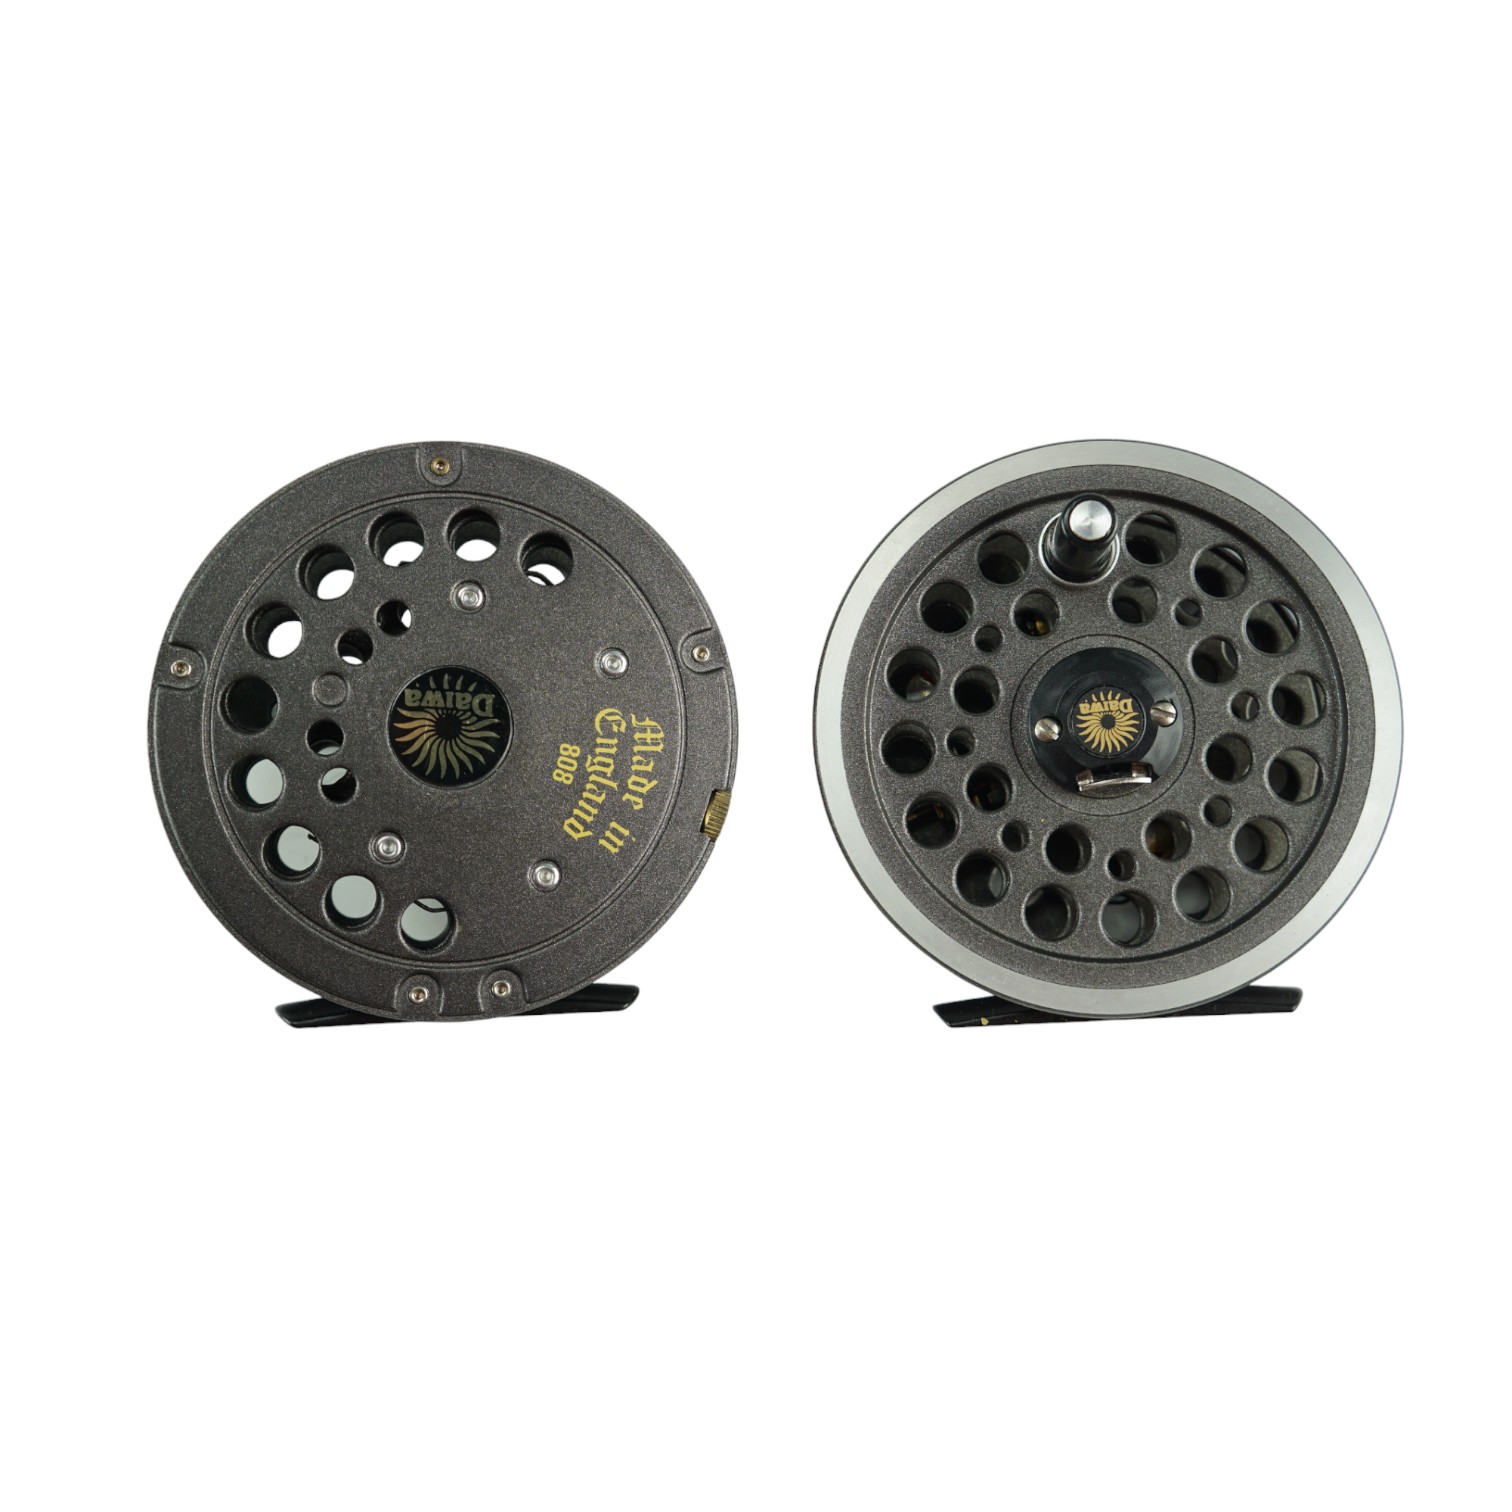 Two Daiwa 808 Osprey centre-pin fly fishing reels, apparently unused - Image 2 of 3